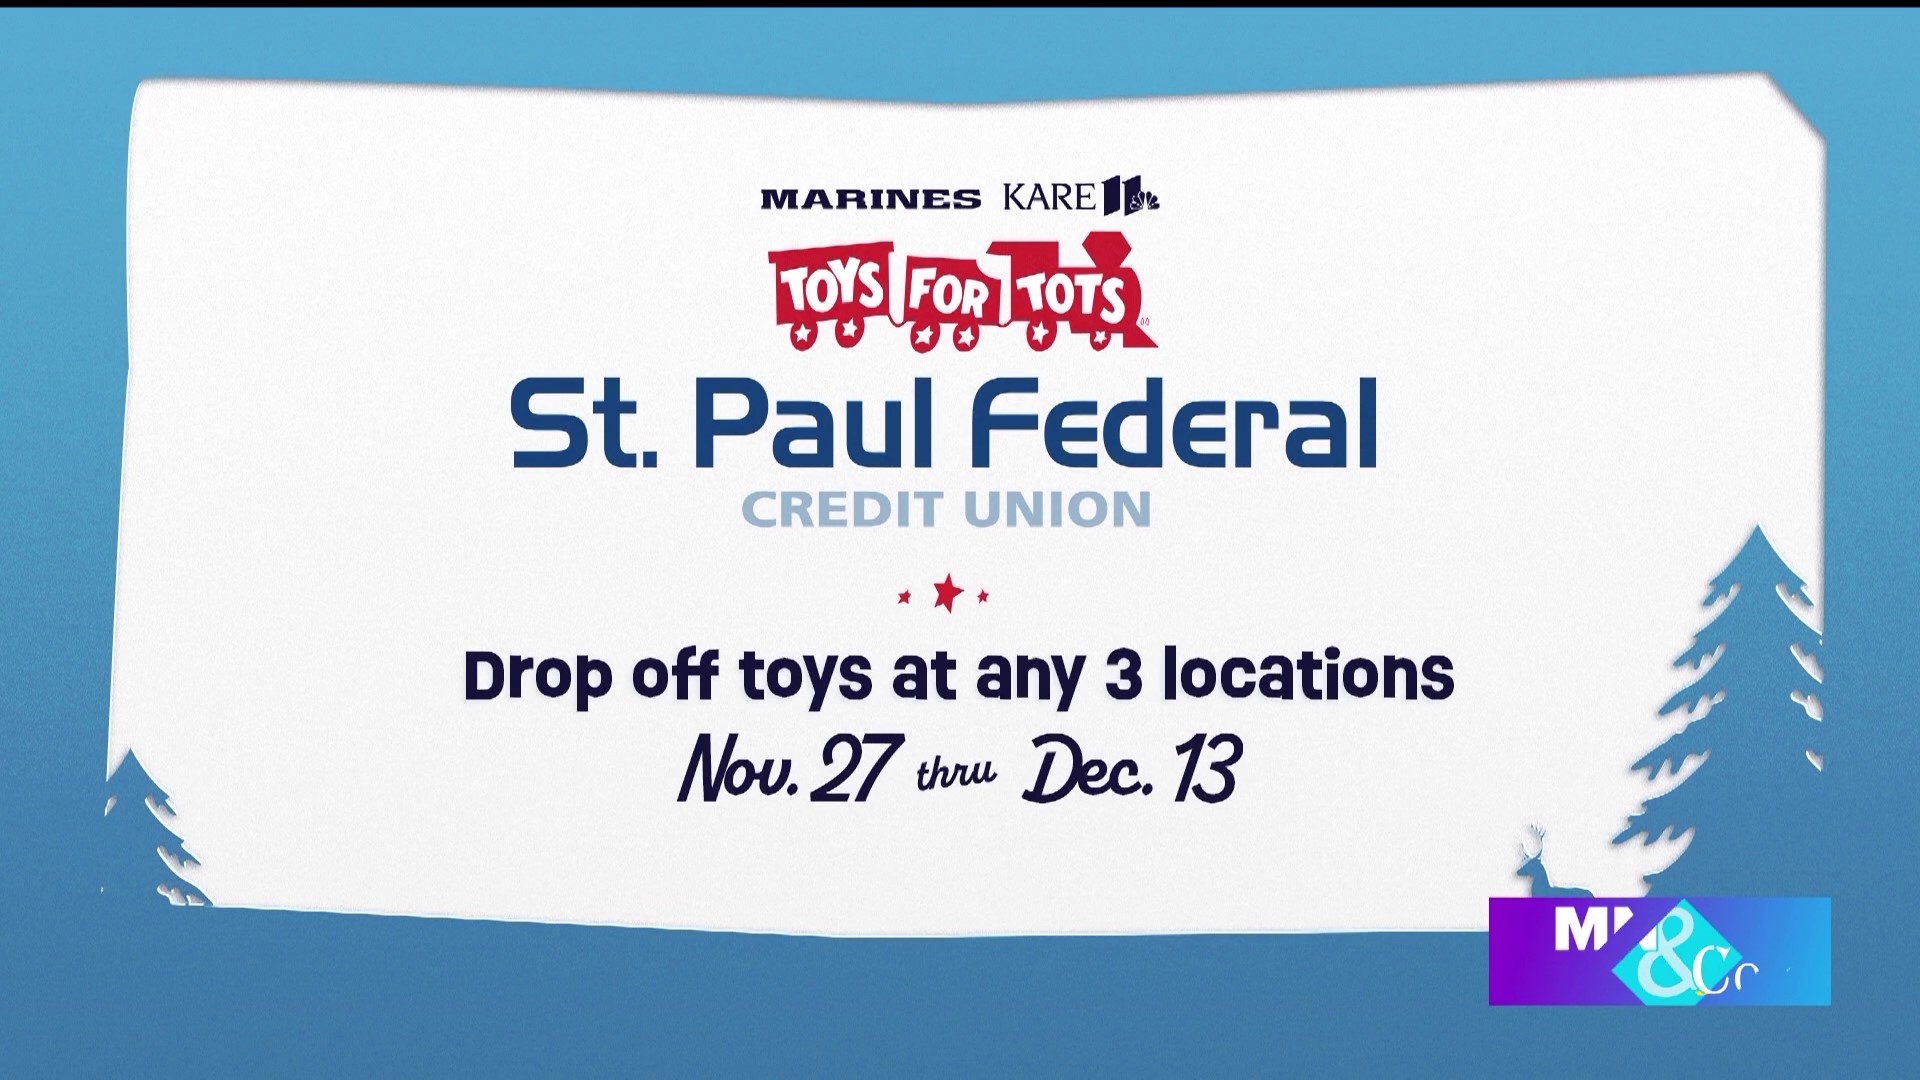 Toys For Tots Their 6th Year